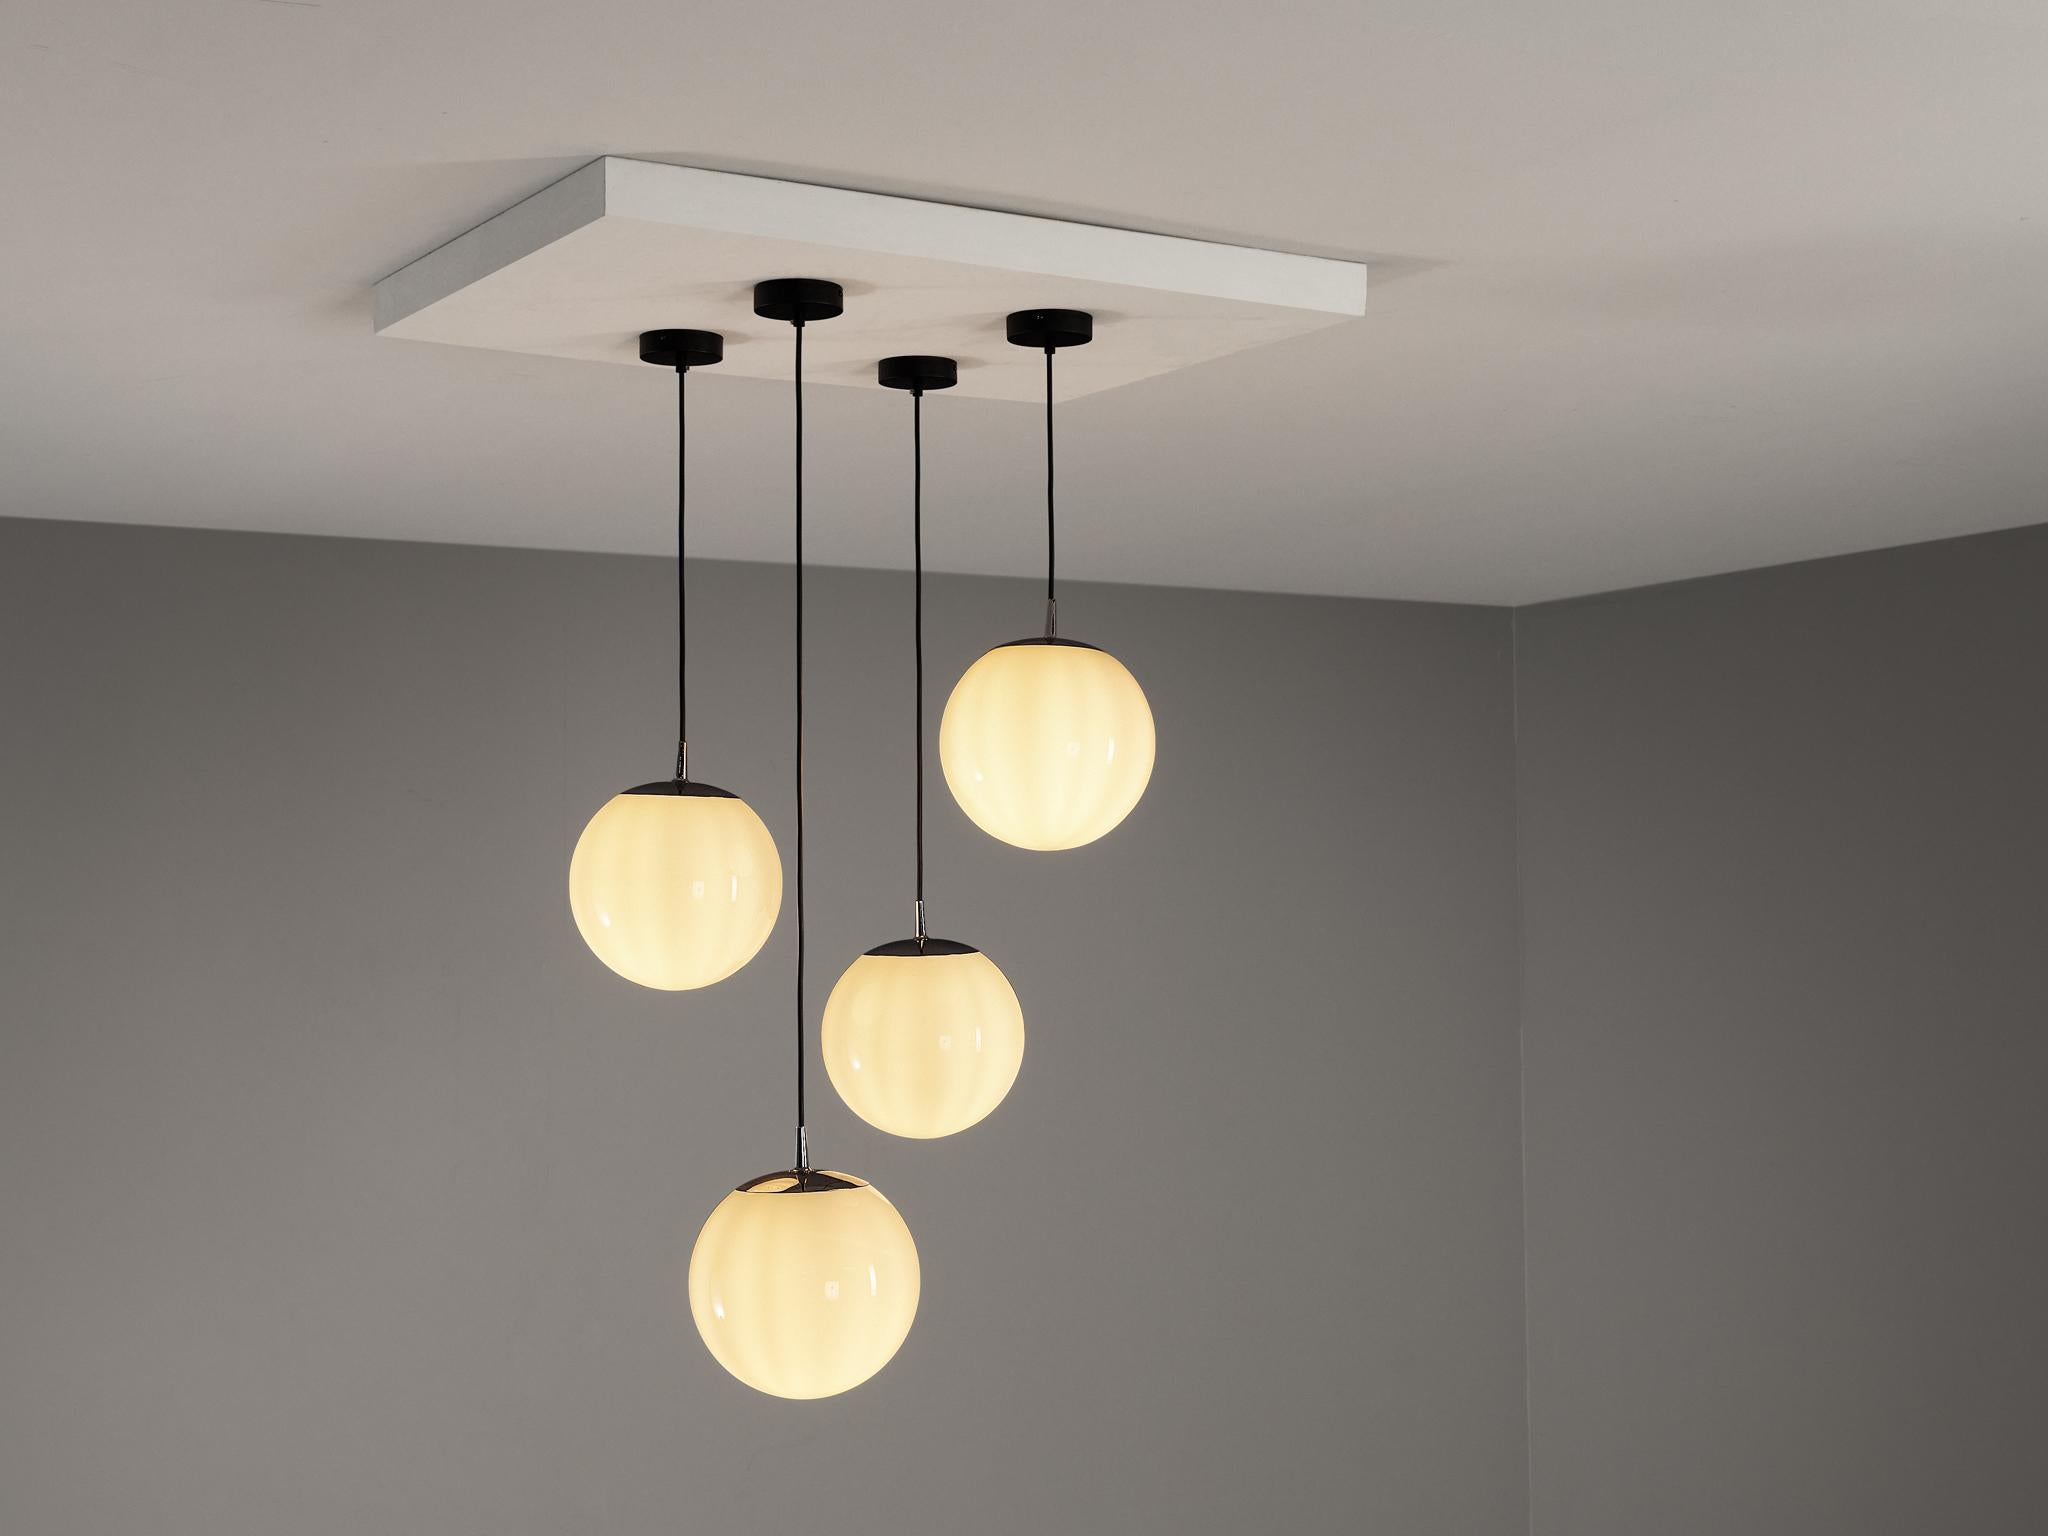 Pendants, glass, chrome-plated metal, Europe, 1960s

These atmospheric pendant lamps features each an opaque white glass orb. This results in a nice and soft light-tone creating a lively ambience in the room. The lamps can be hung above a large